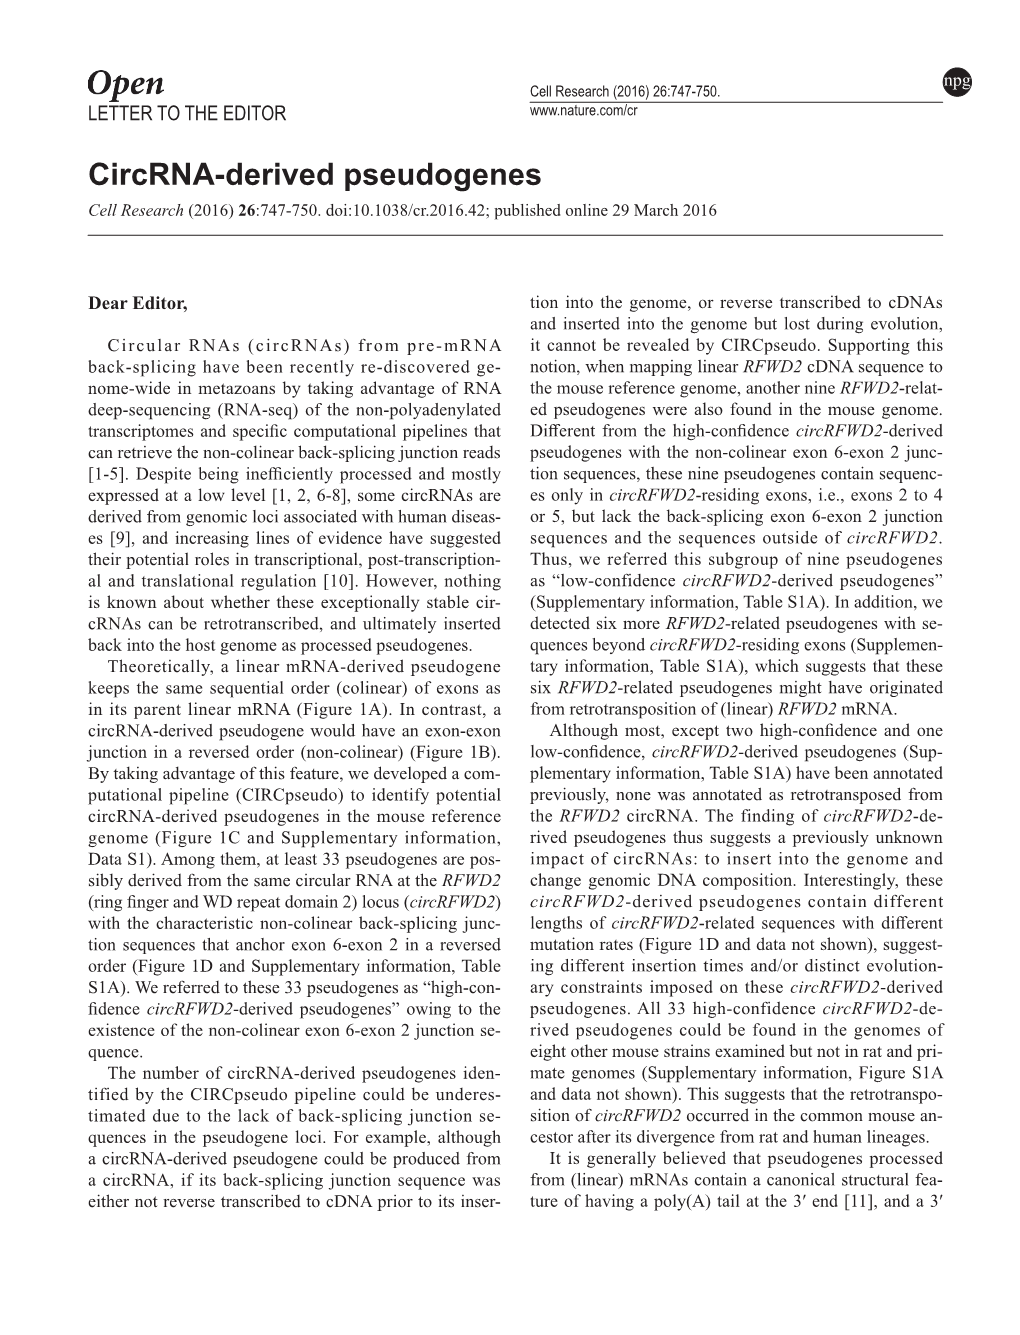 Circrna-Derived Pseudogenes Cell Research (2016) 26:747-750